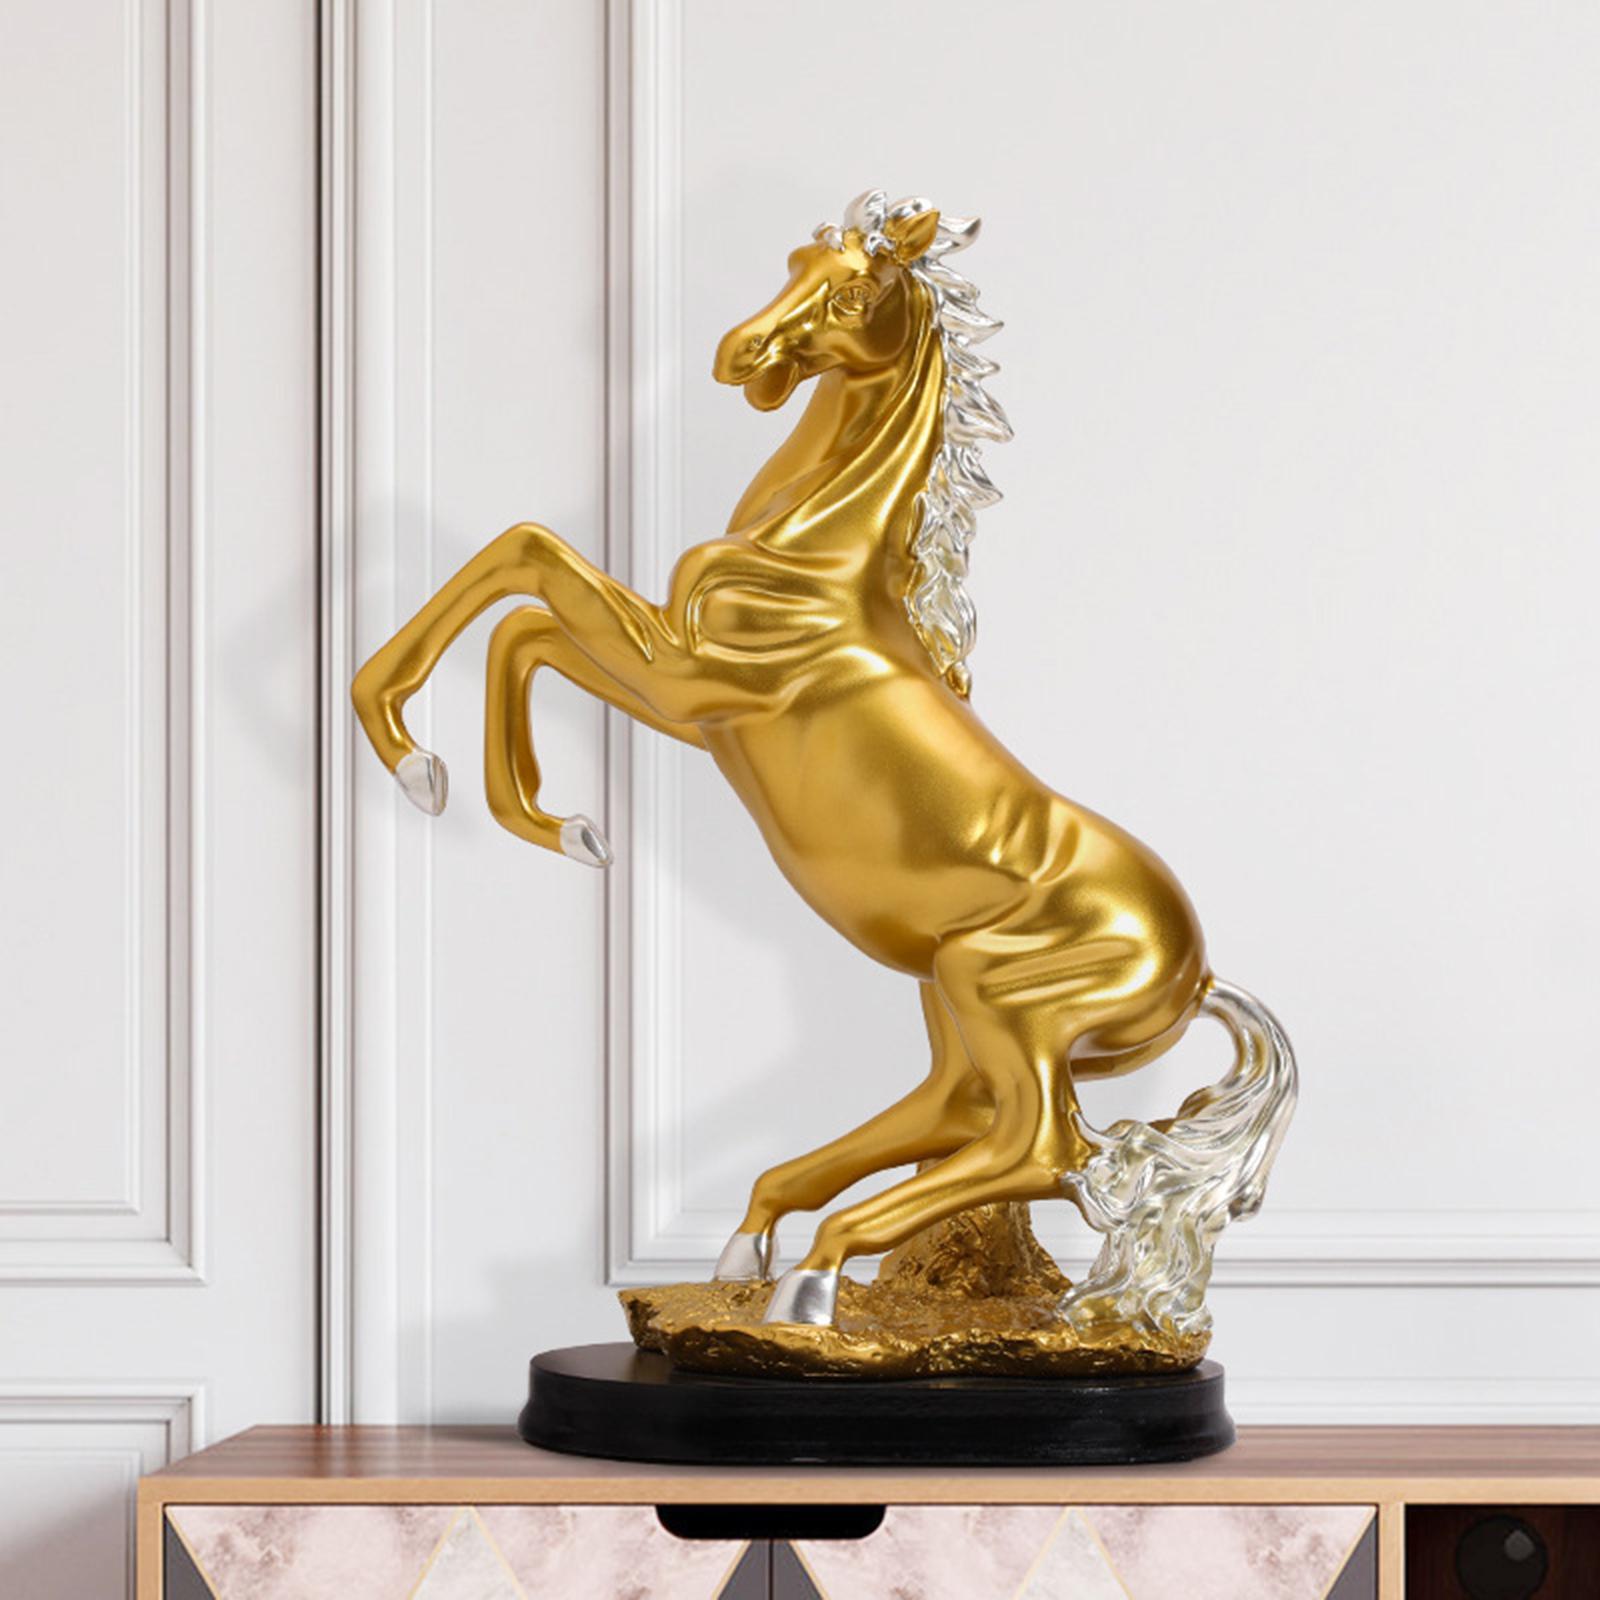 Horse Statues Animal Sculptures Decorative Souvenirs Gifts Collectible Art Works Resin Figurines for Wedding Bedroom  Stand Cabinet